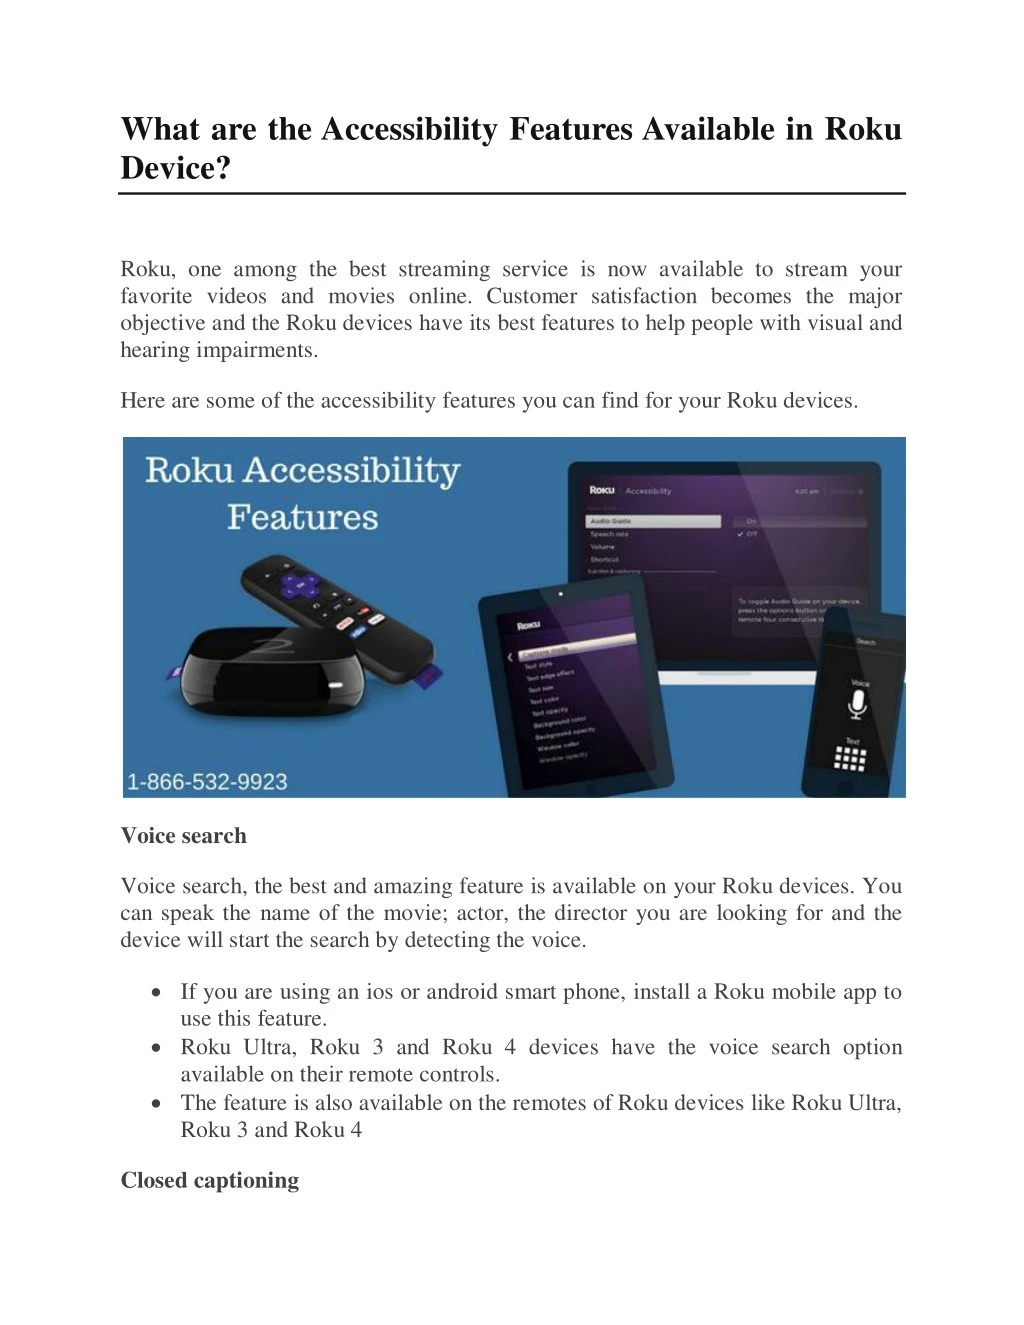 PPT - Get the Accessibility Features on Your Roku Device ...